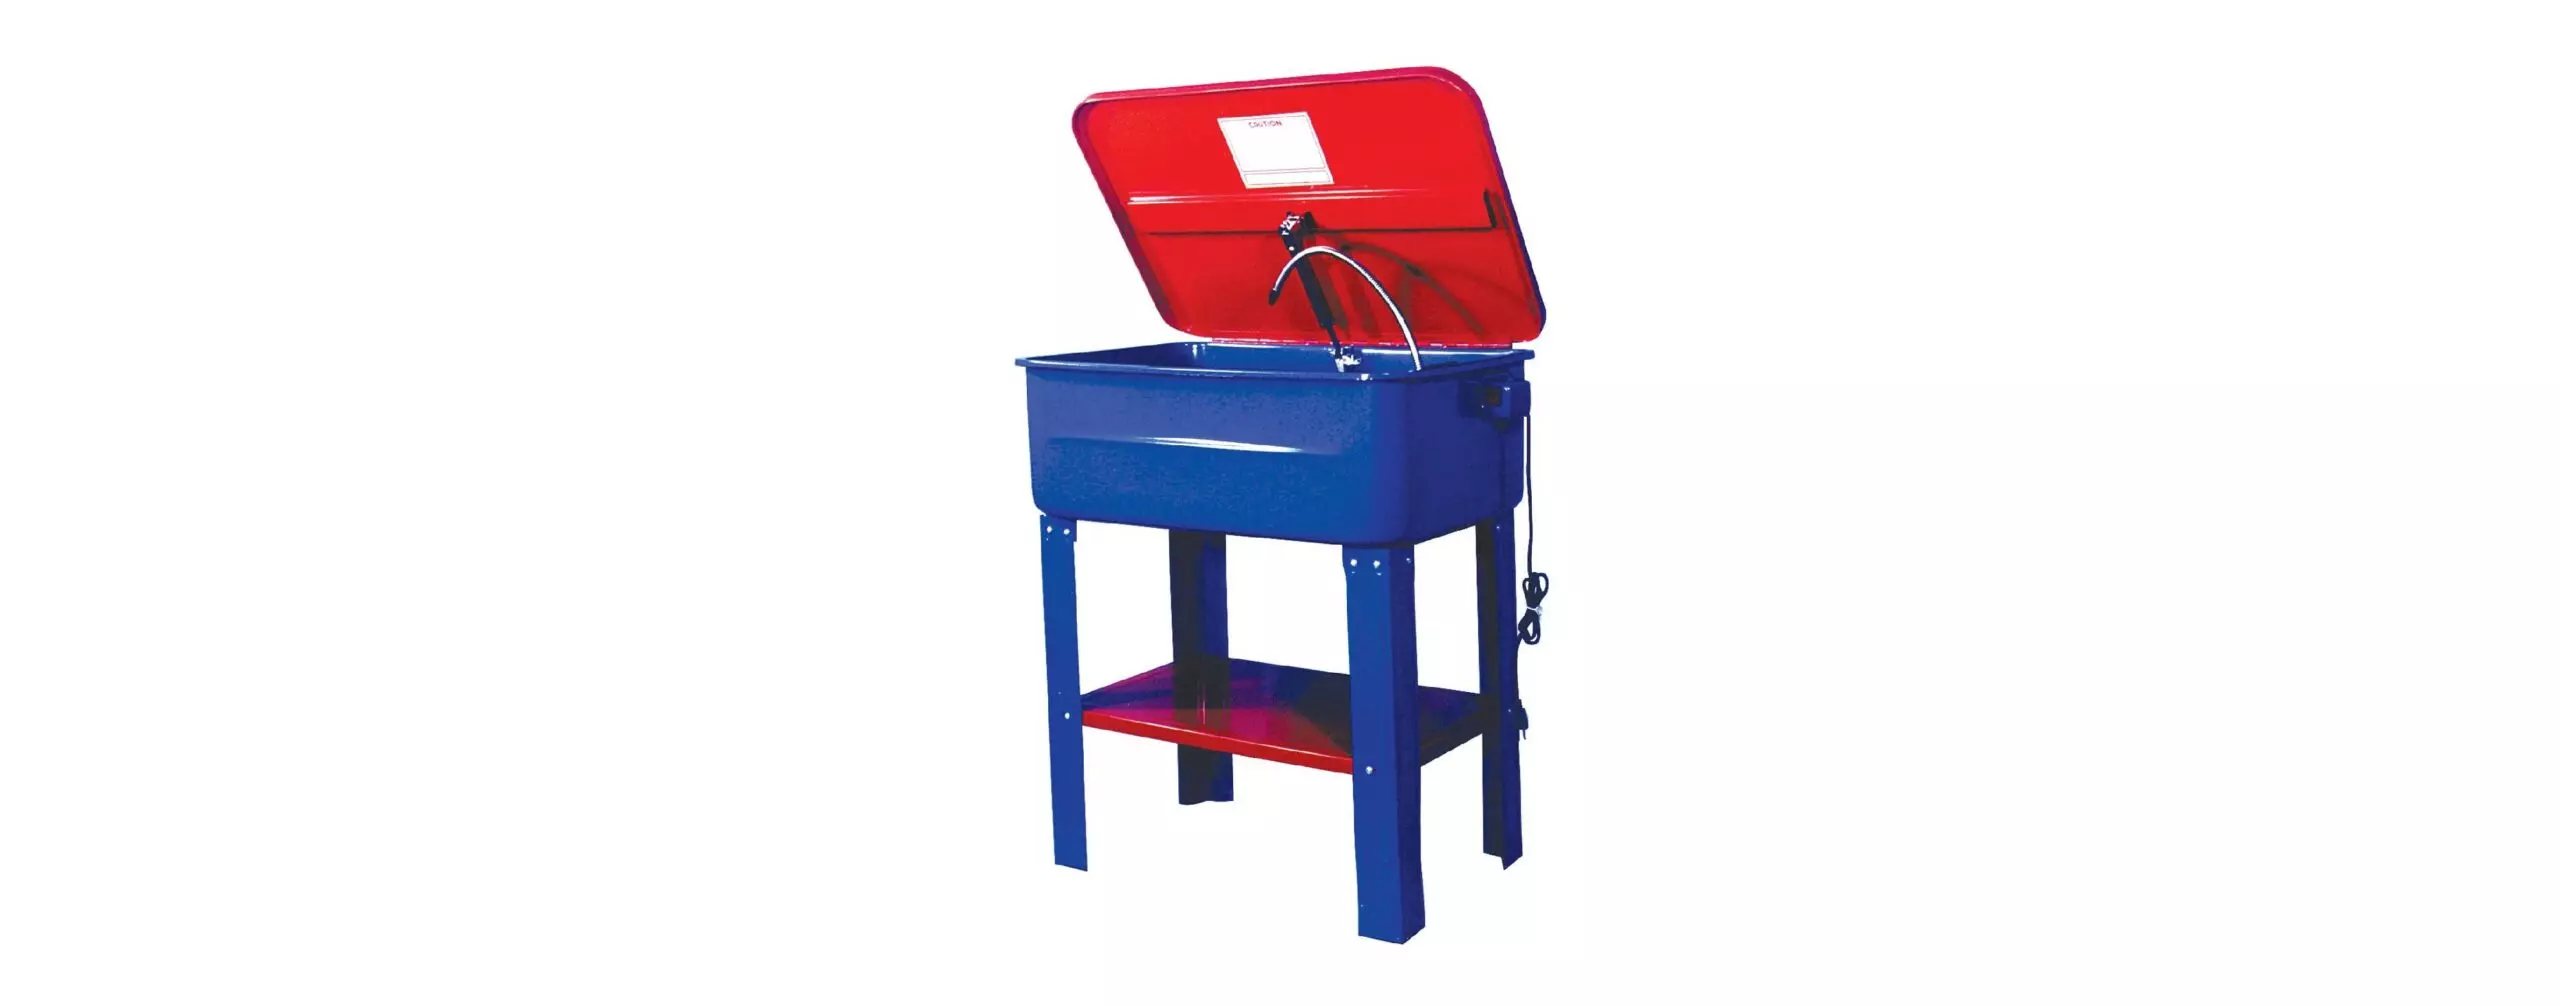 Astro 20-Gallon Electric Parts Washer